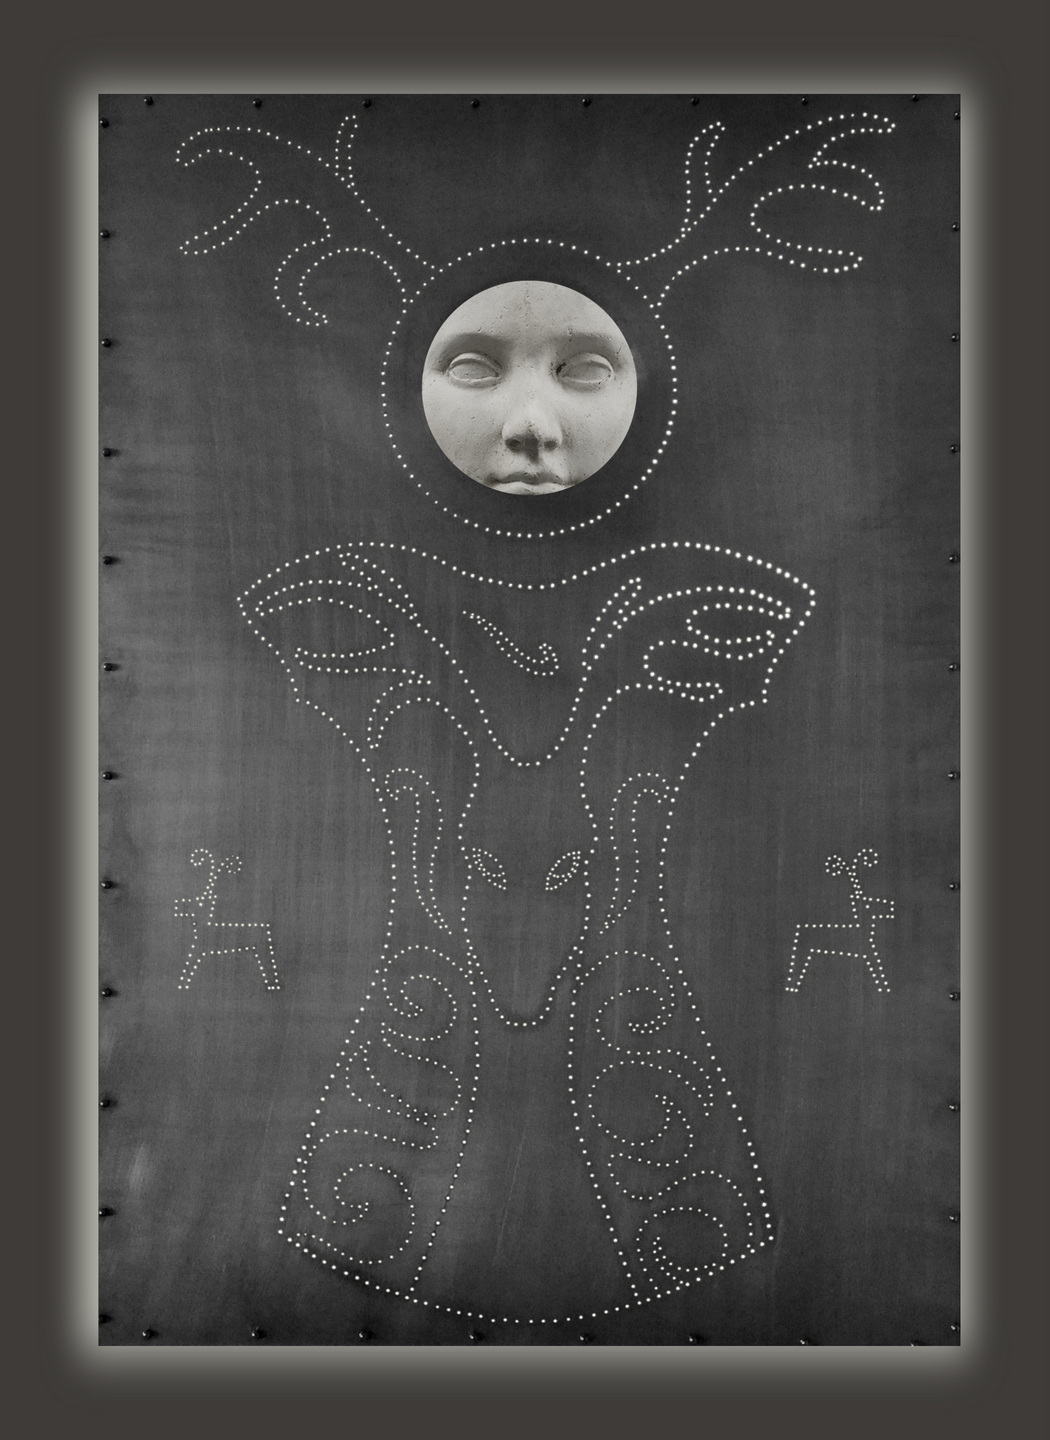 Pietro Mancini - Holy Astronaut II 80 x 120 x 5 cm backlit perforated aluminum and polycarbonate print